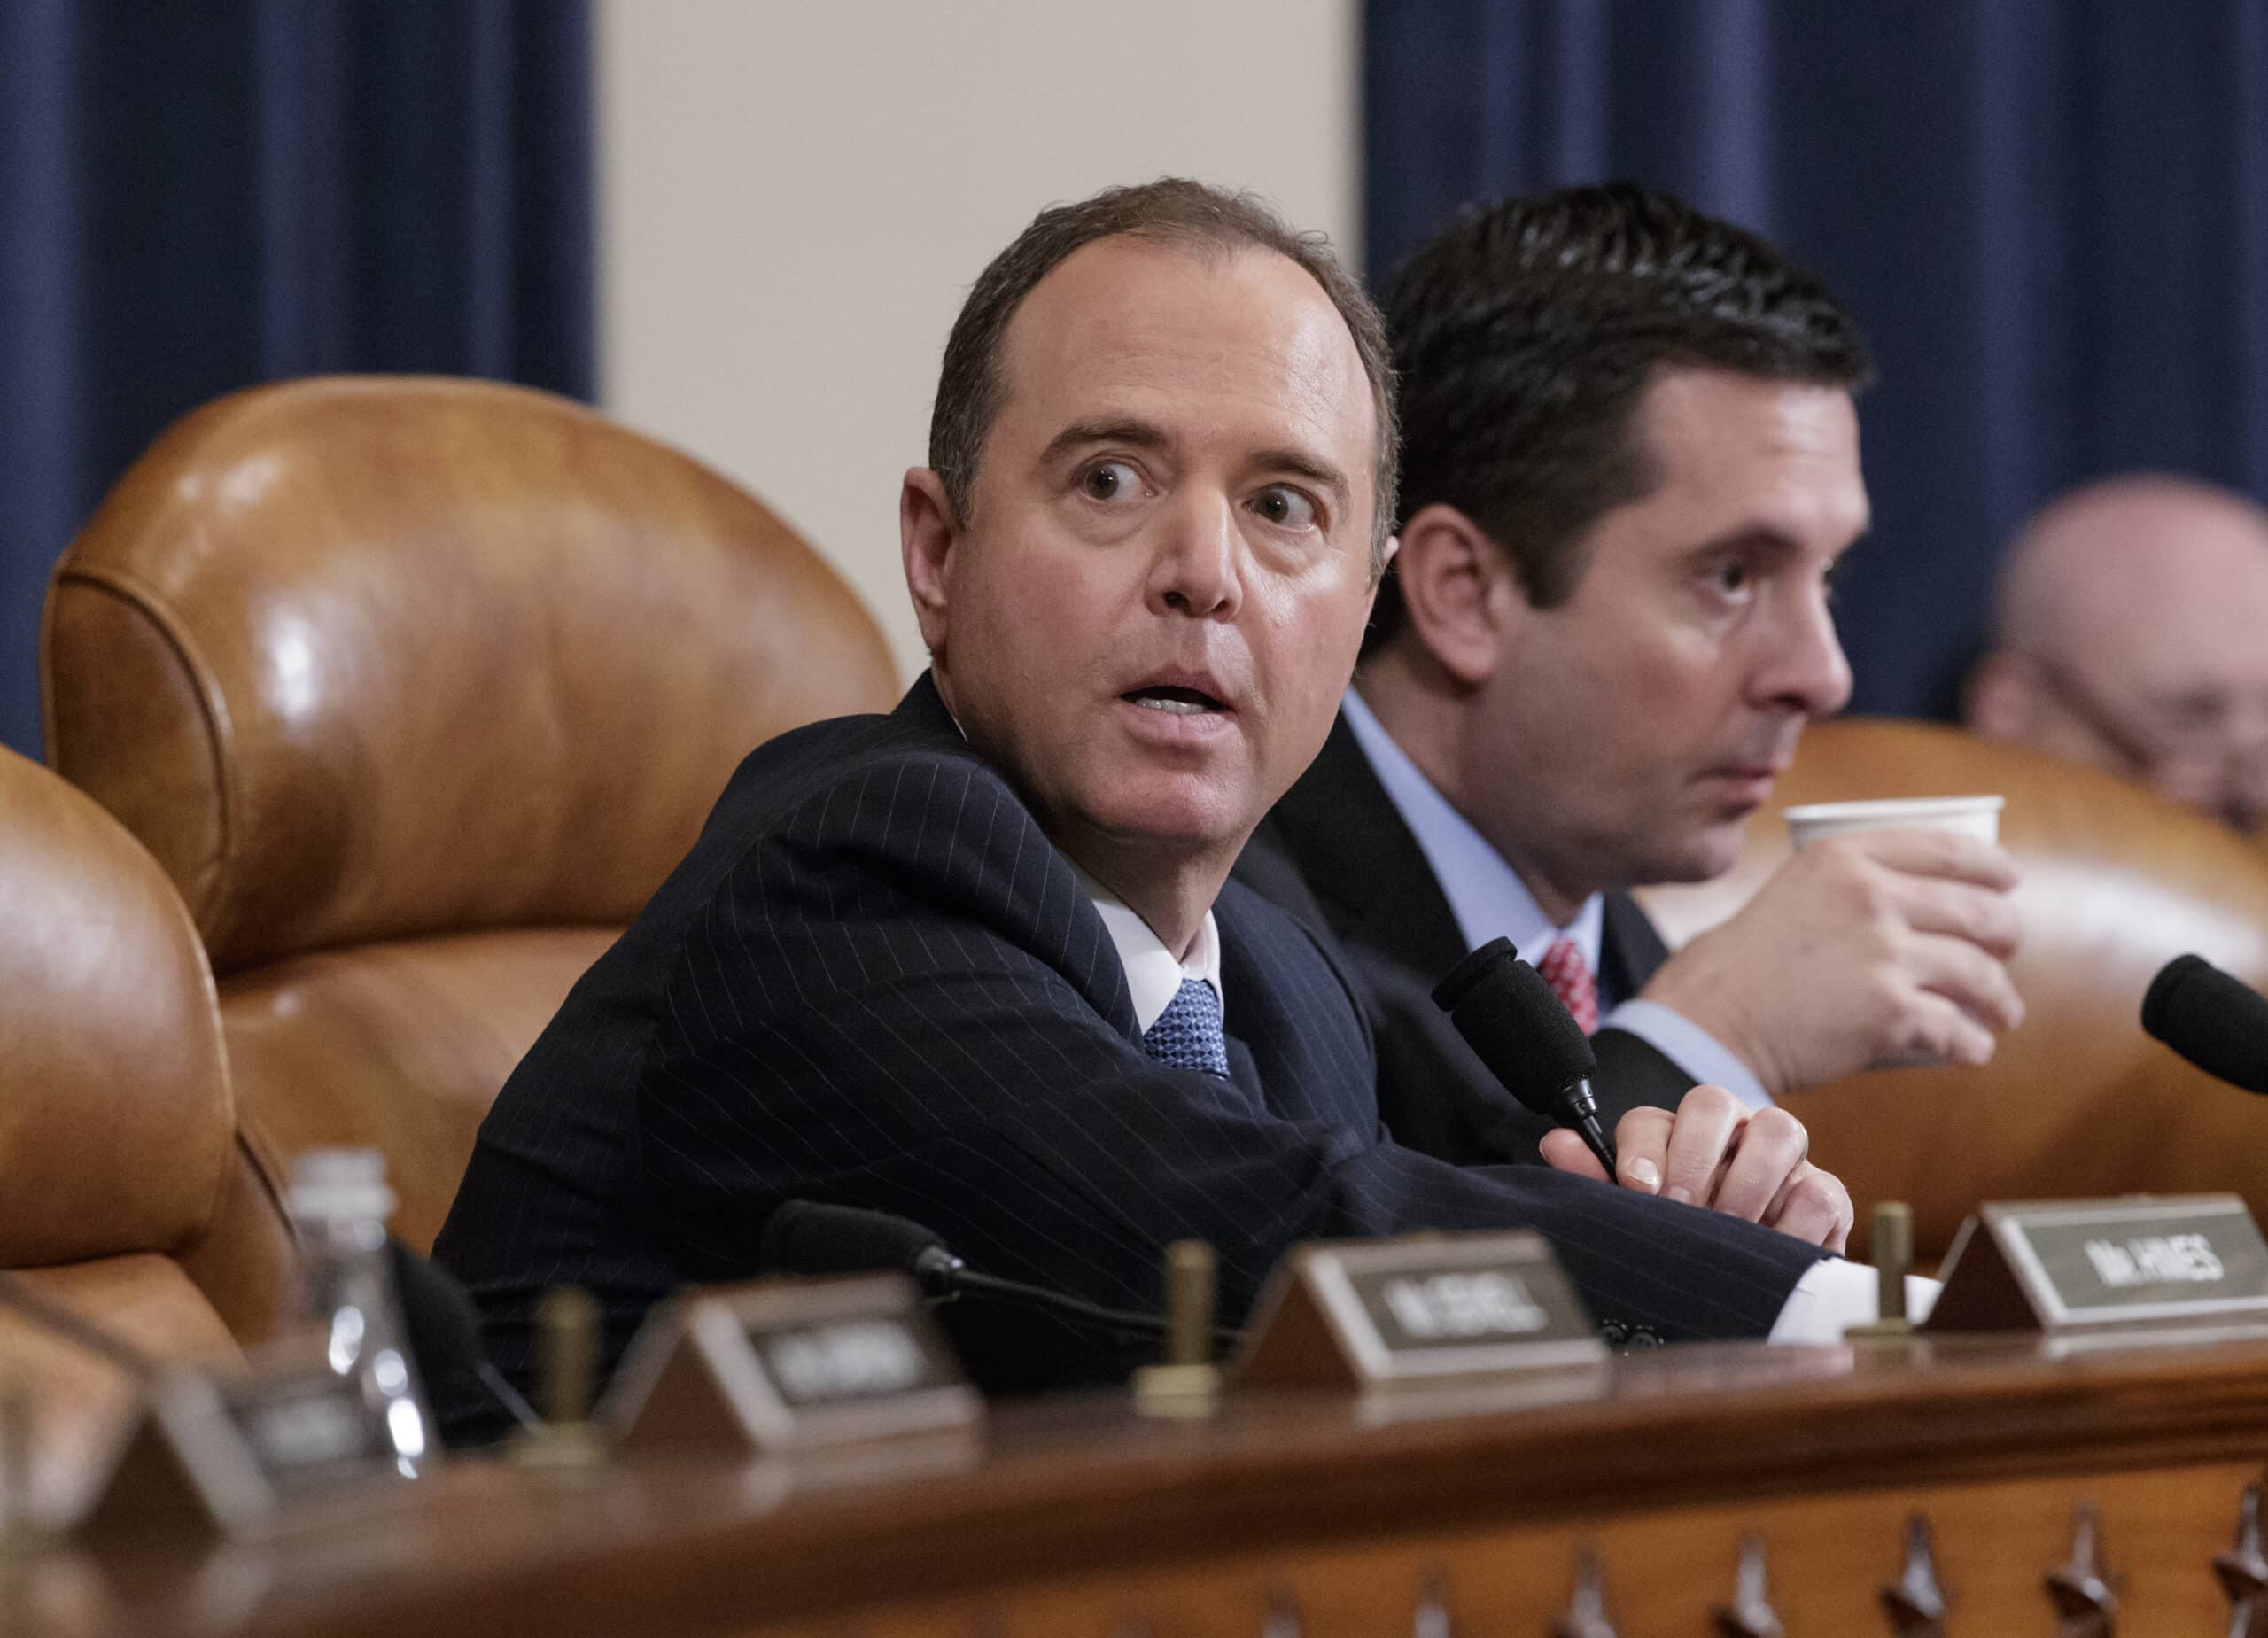 Rep. Adam Schiff, D-Calif., the ranking member, left, and Rep. Devin Nunes, R-Calif., the House Intelligence Committee chairman, listen as FBI Director James Comey testifies on Capitol Hill in Washington, Monday, March 20, 2017, before the House Intelligence Committee hearing on allegations of Russian interference in the 2016 U.S. presidential election. (AP Photo/J. Scott Applewhite)